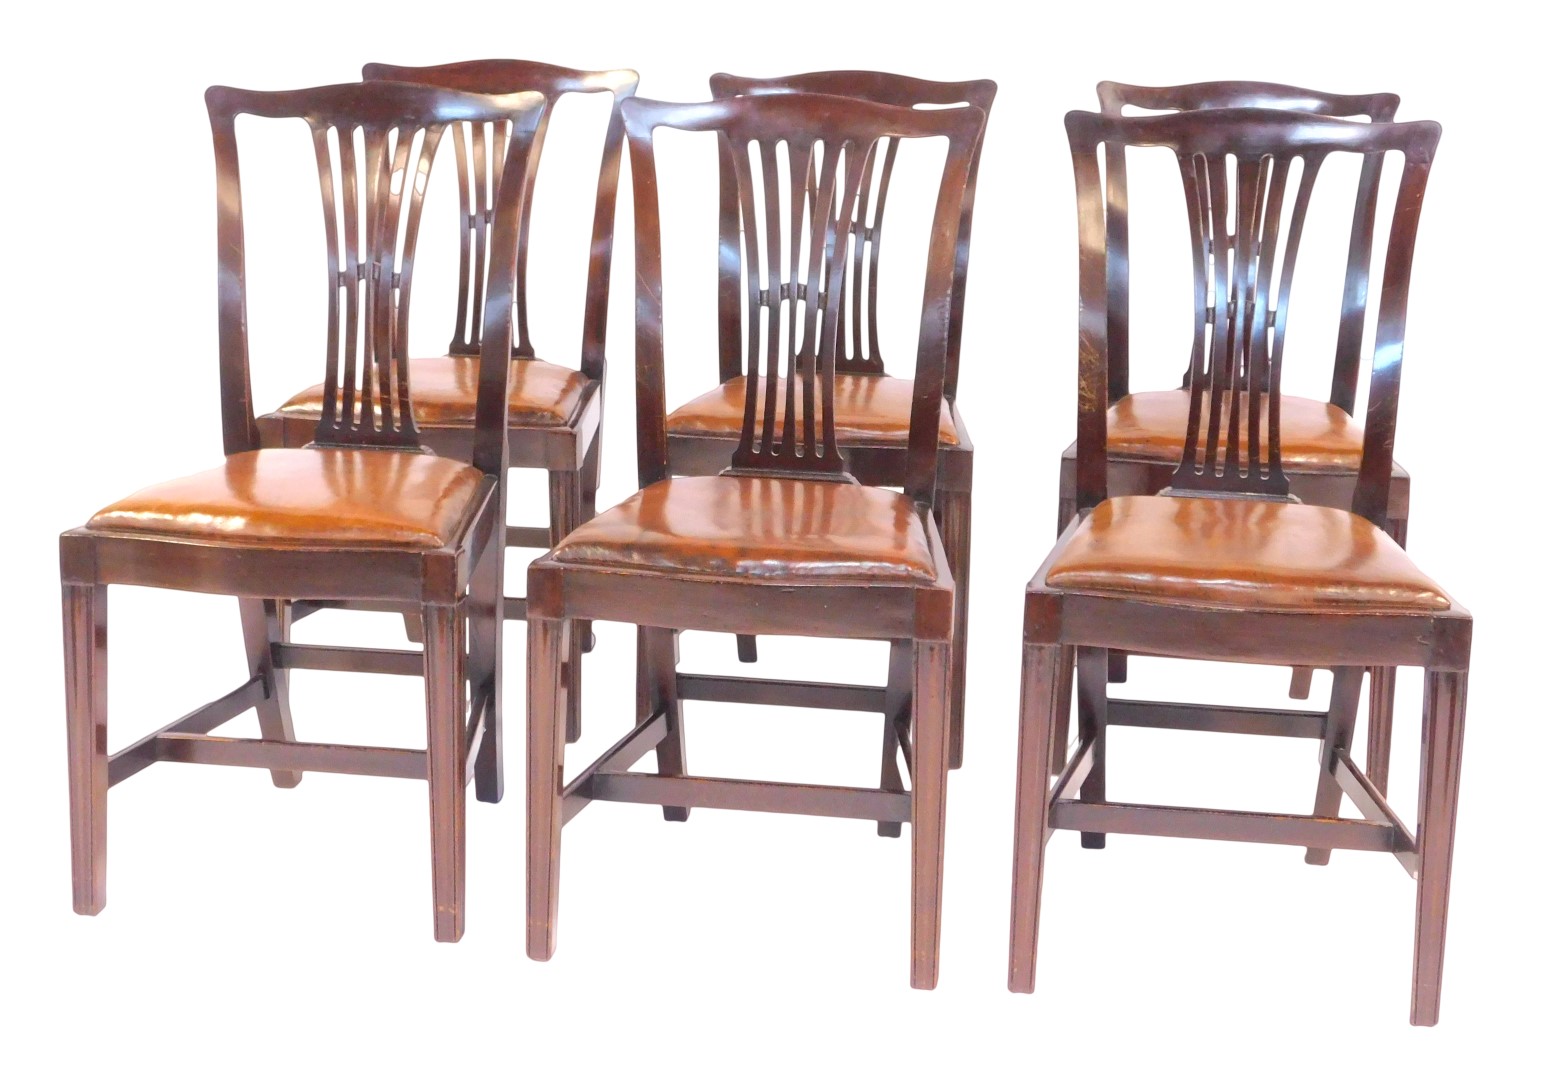 A set of six Edwardian mahogany dining chairs, each with a pierced vase shaped splat, brown leather